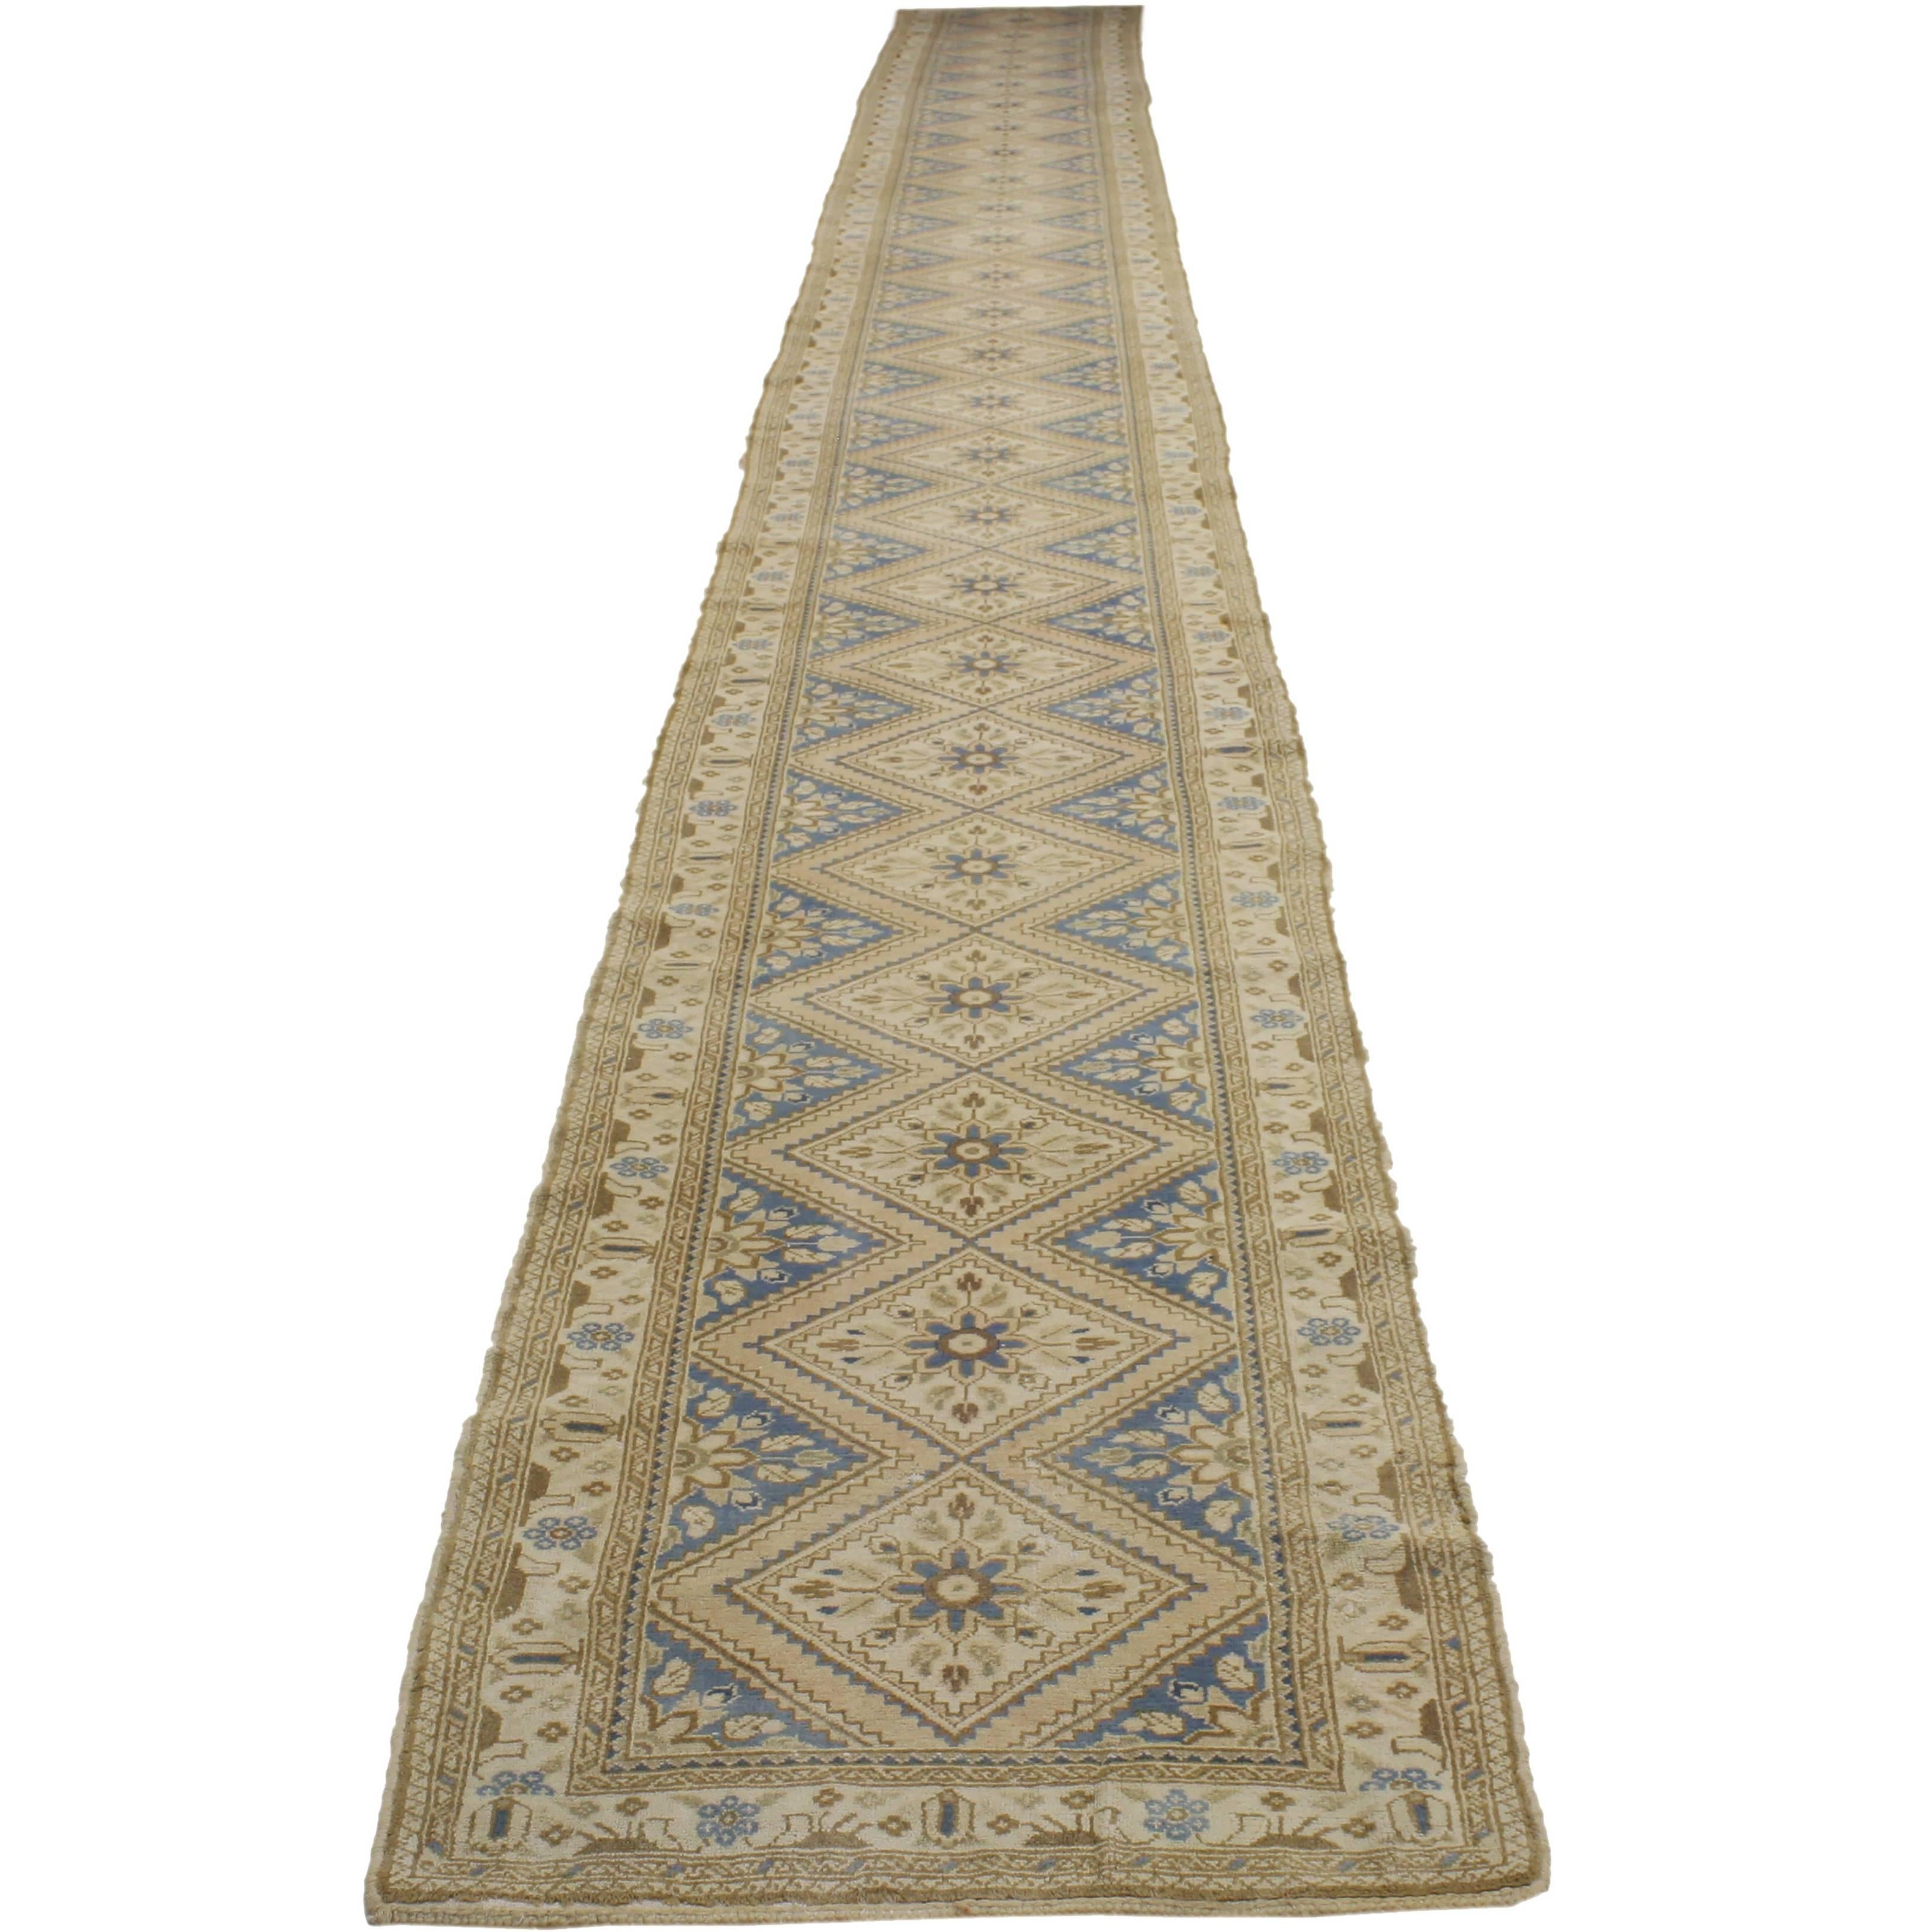 Antique Persian Malayer Runner with French Provincial Style, Long Hallway Runner